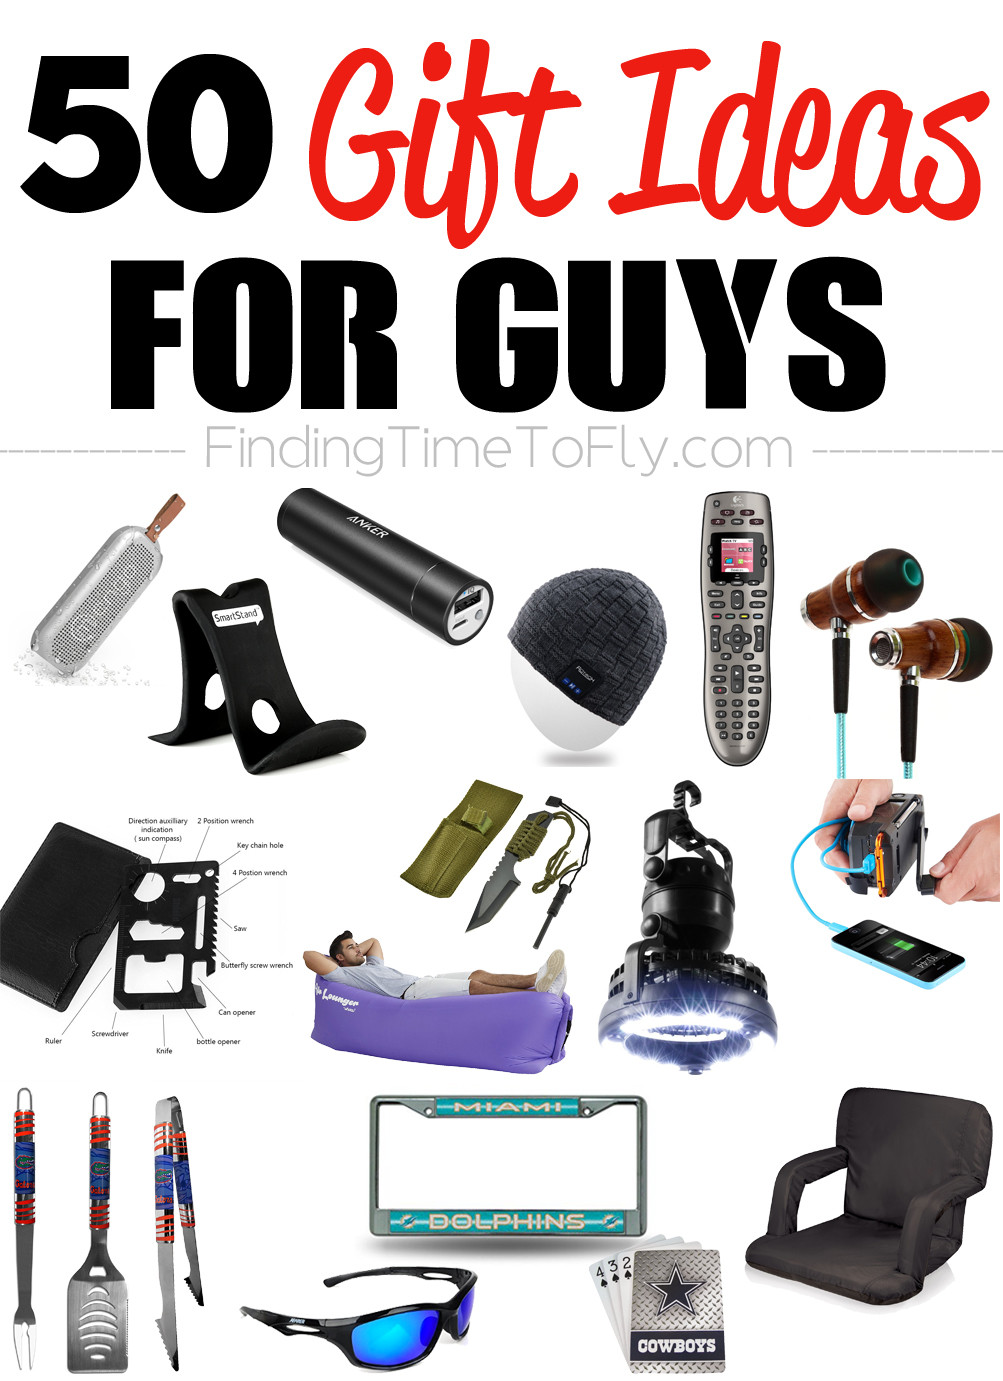 Holiday Gift Ideas For Guys
 50 Gifts for Guys for Every Occasion Finding Time To Fly